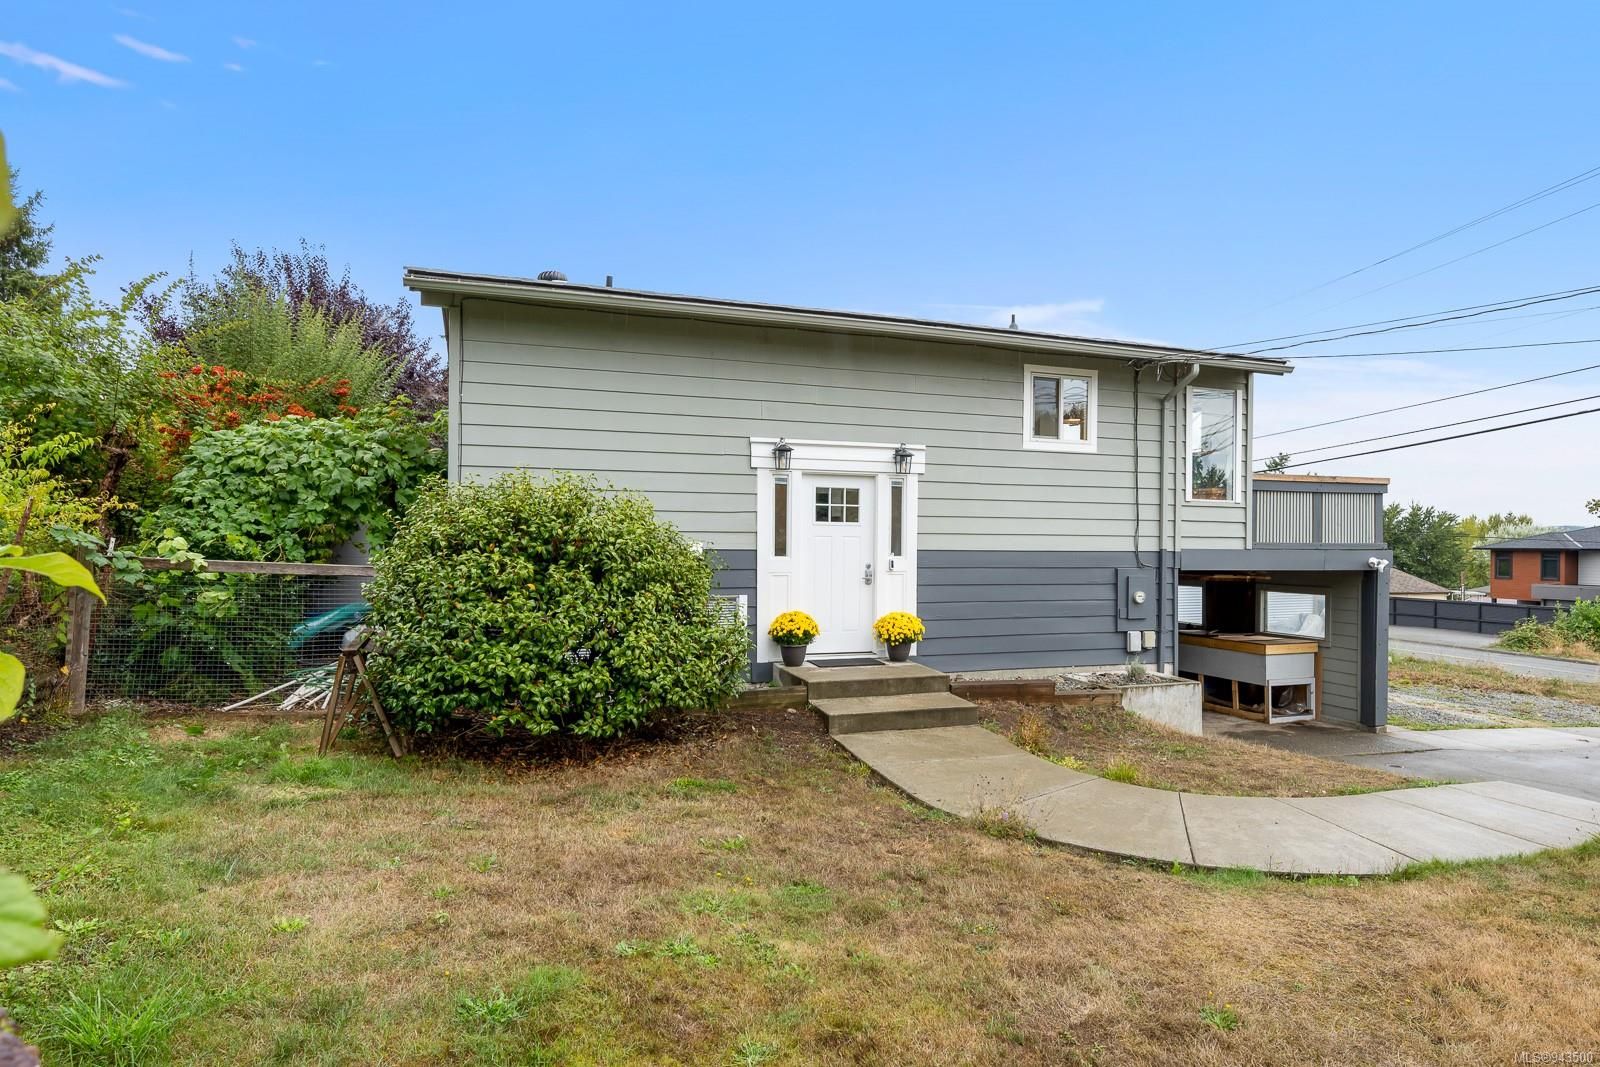 New property listed in CV Courtenay South, Comox Valley